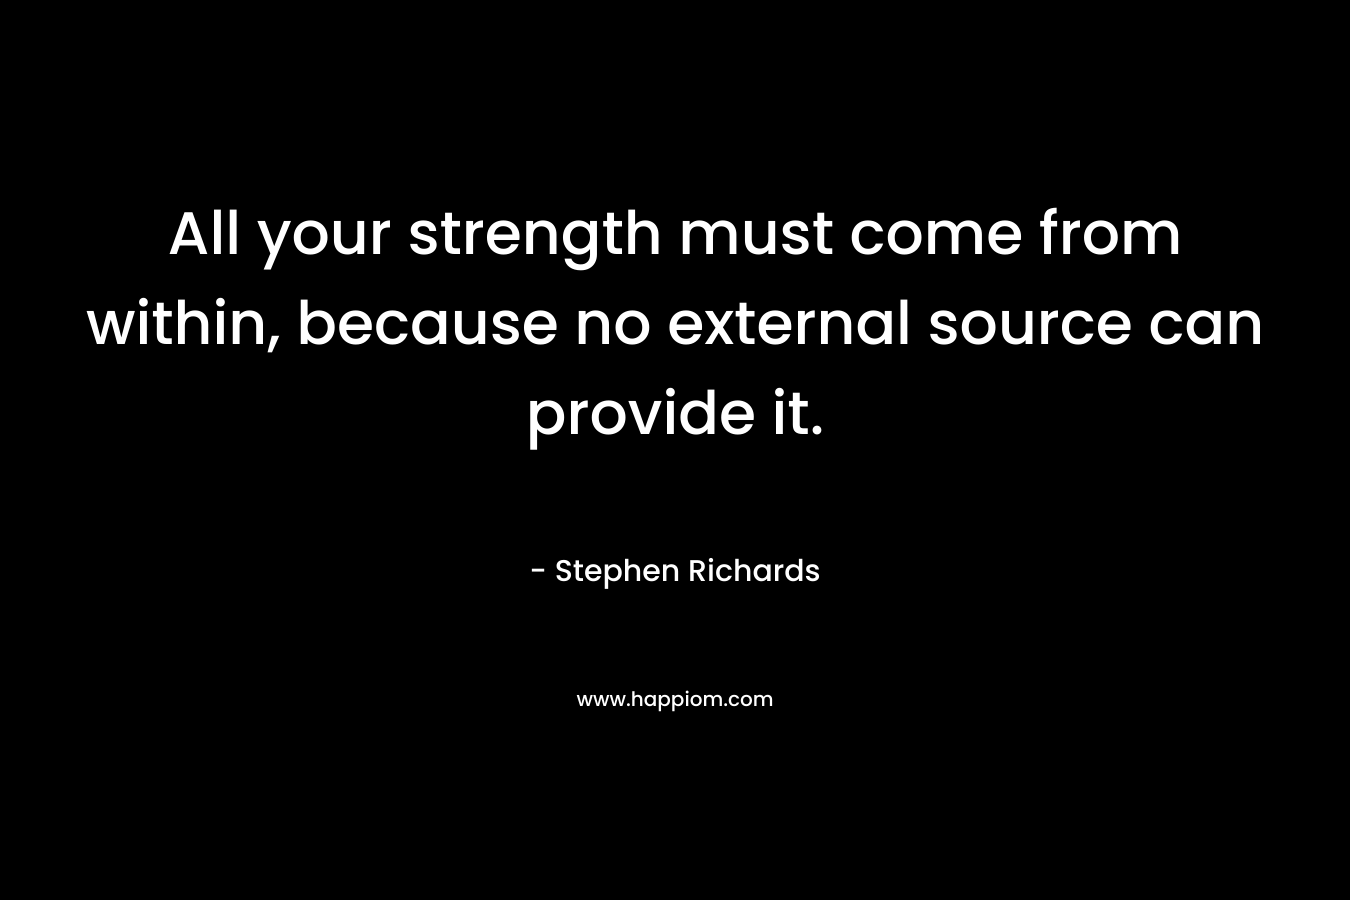 All your strength must come from within, because no external source can provide it.